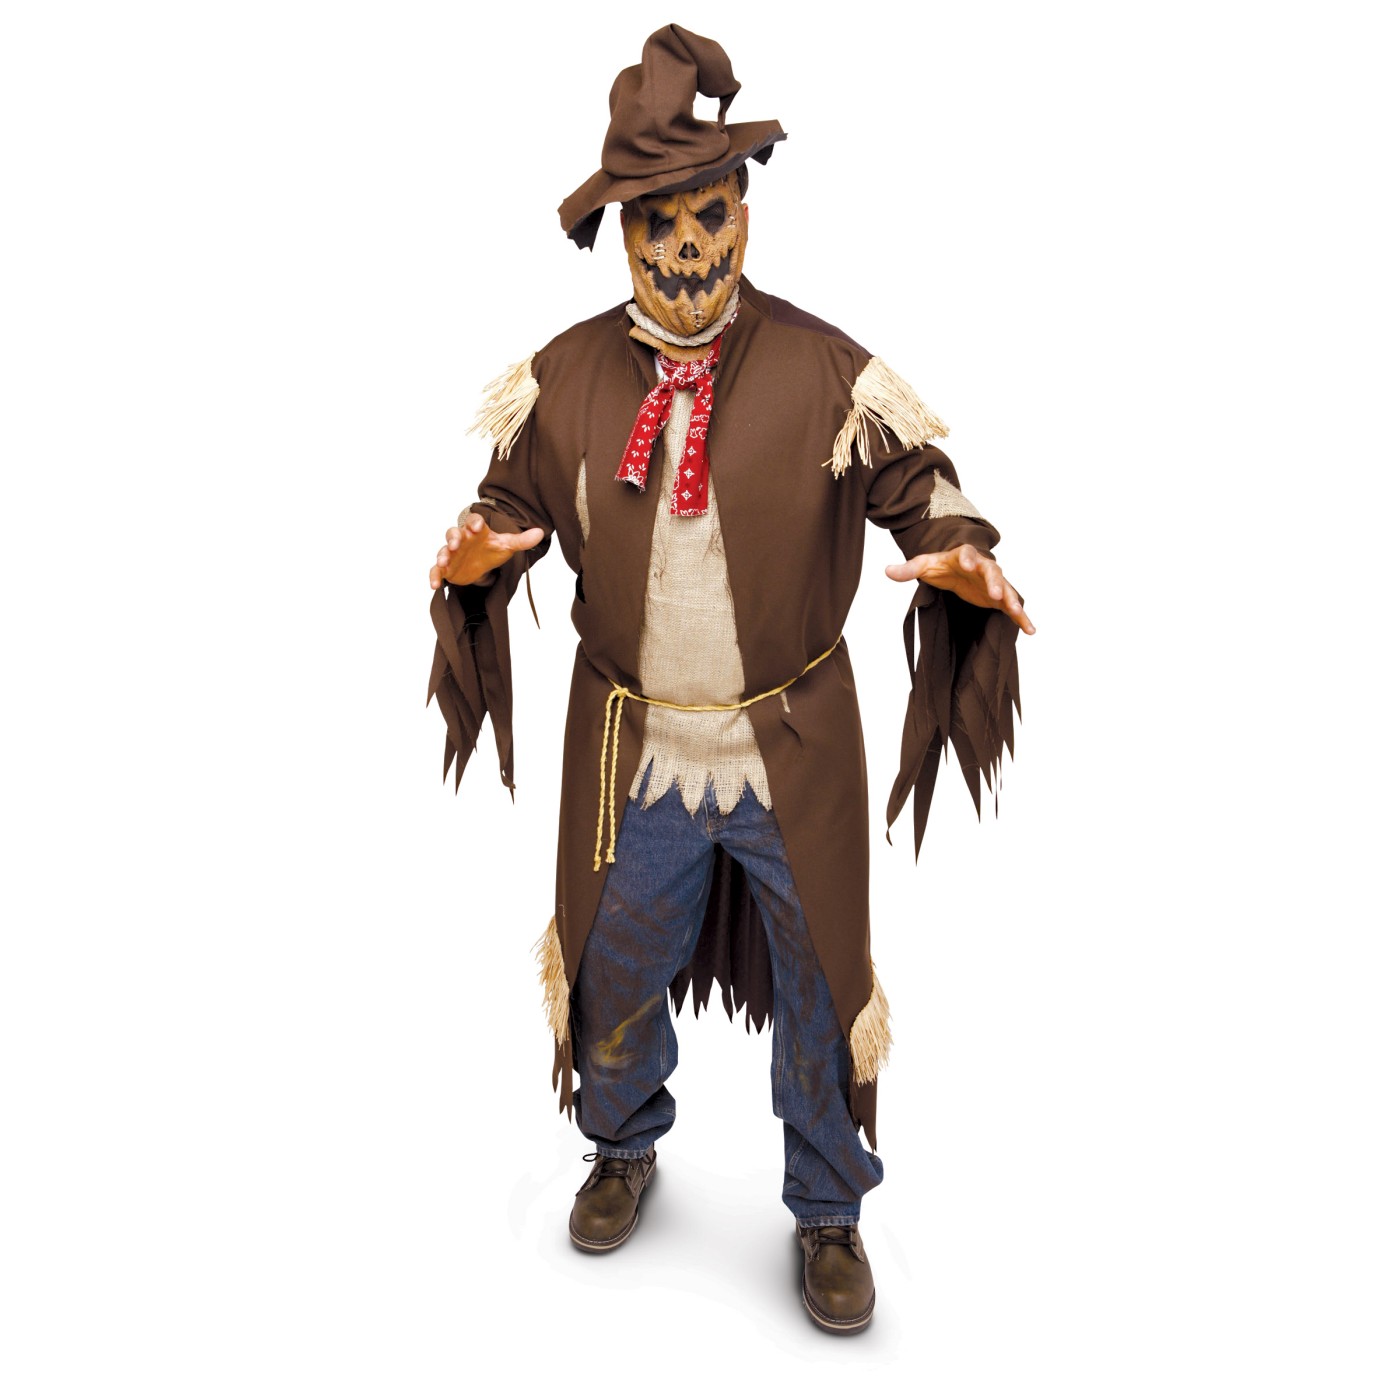 Re: Limited edition costumes for Halloween? 